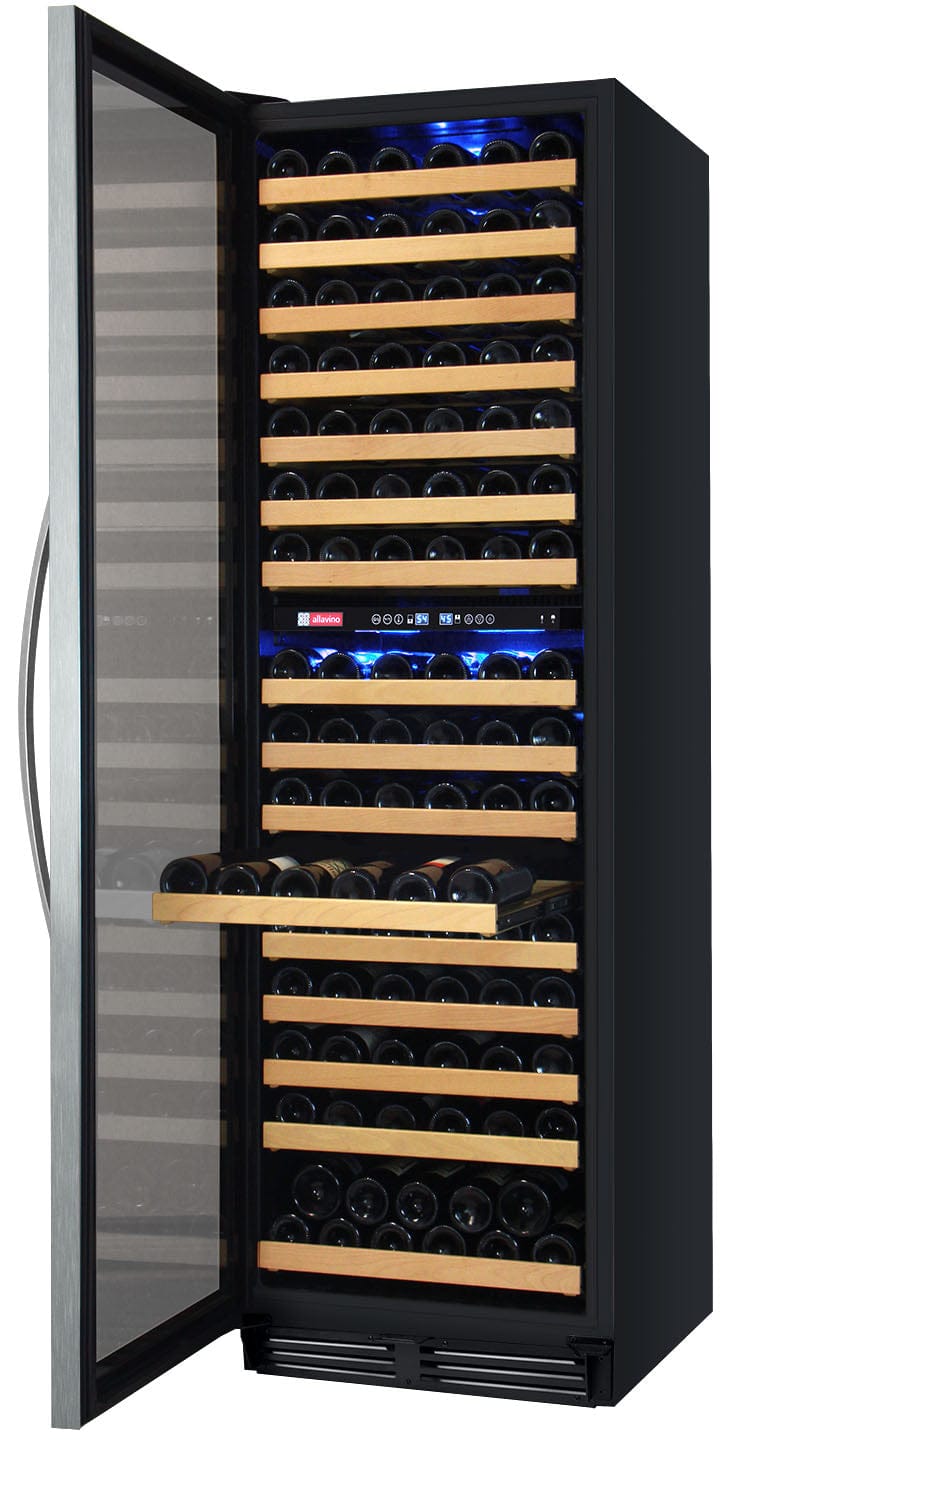 Allavino Flexcount Classic II 172 Bottle Dual Zone 24 Inch Wide Wine Cooler facing left with door half opened and a shelf out full of wine bottles.